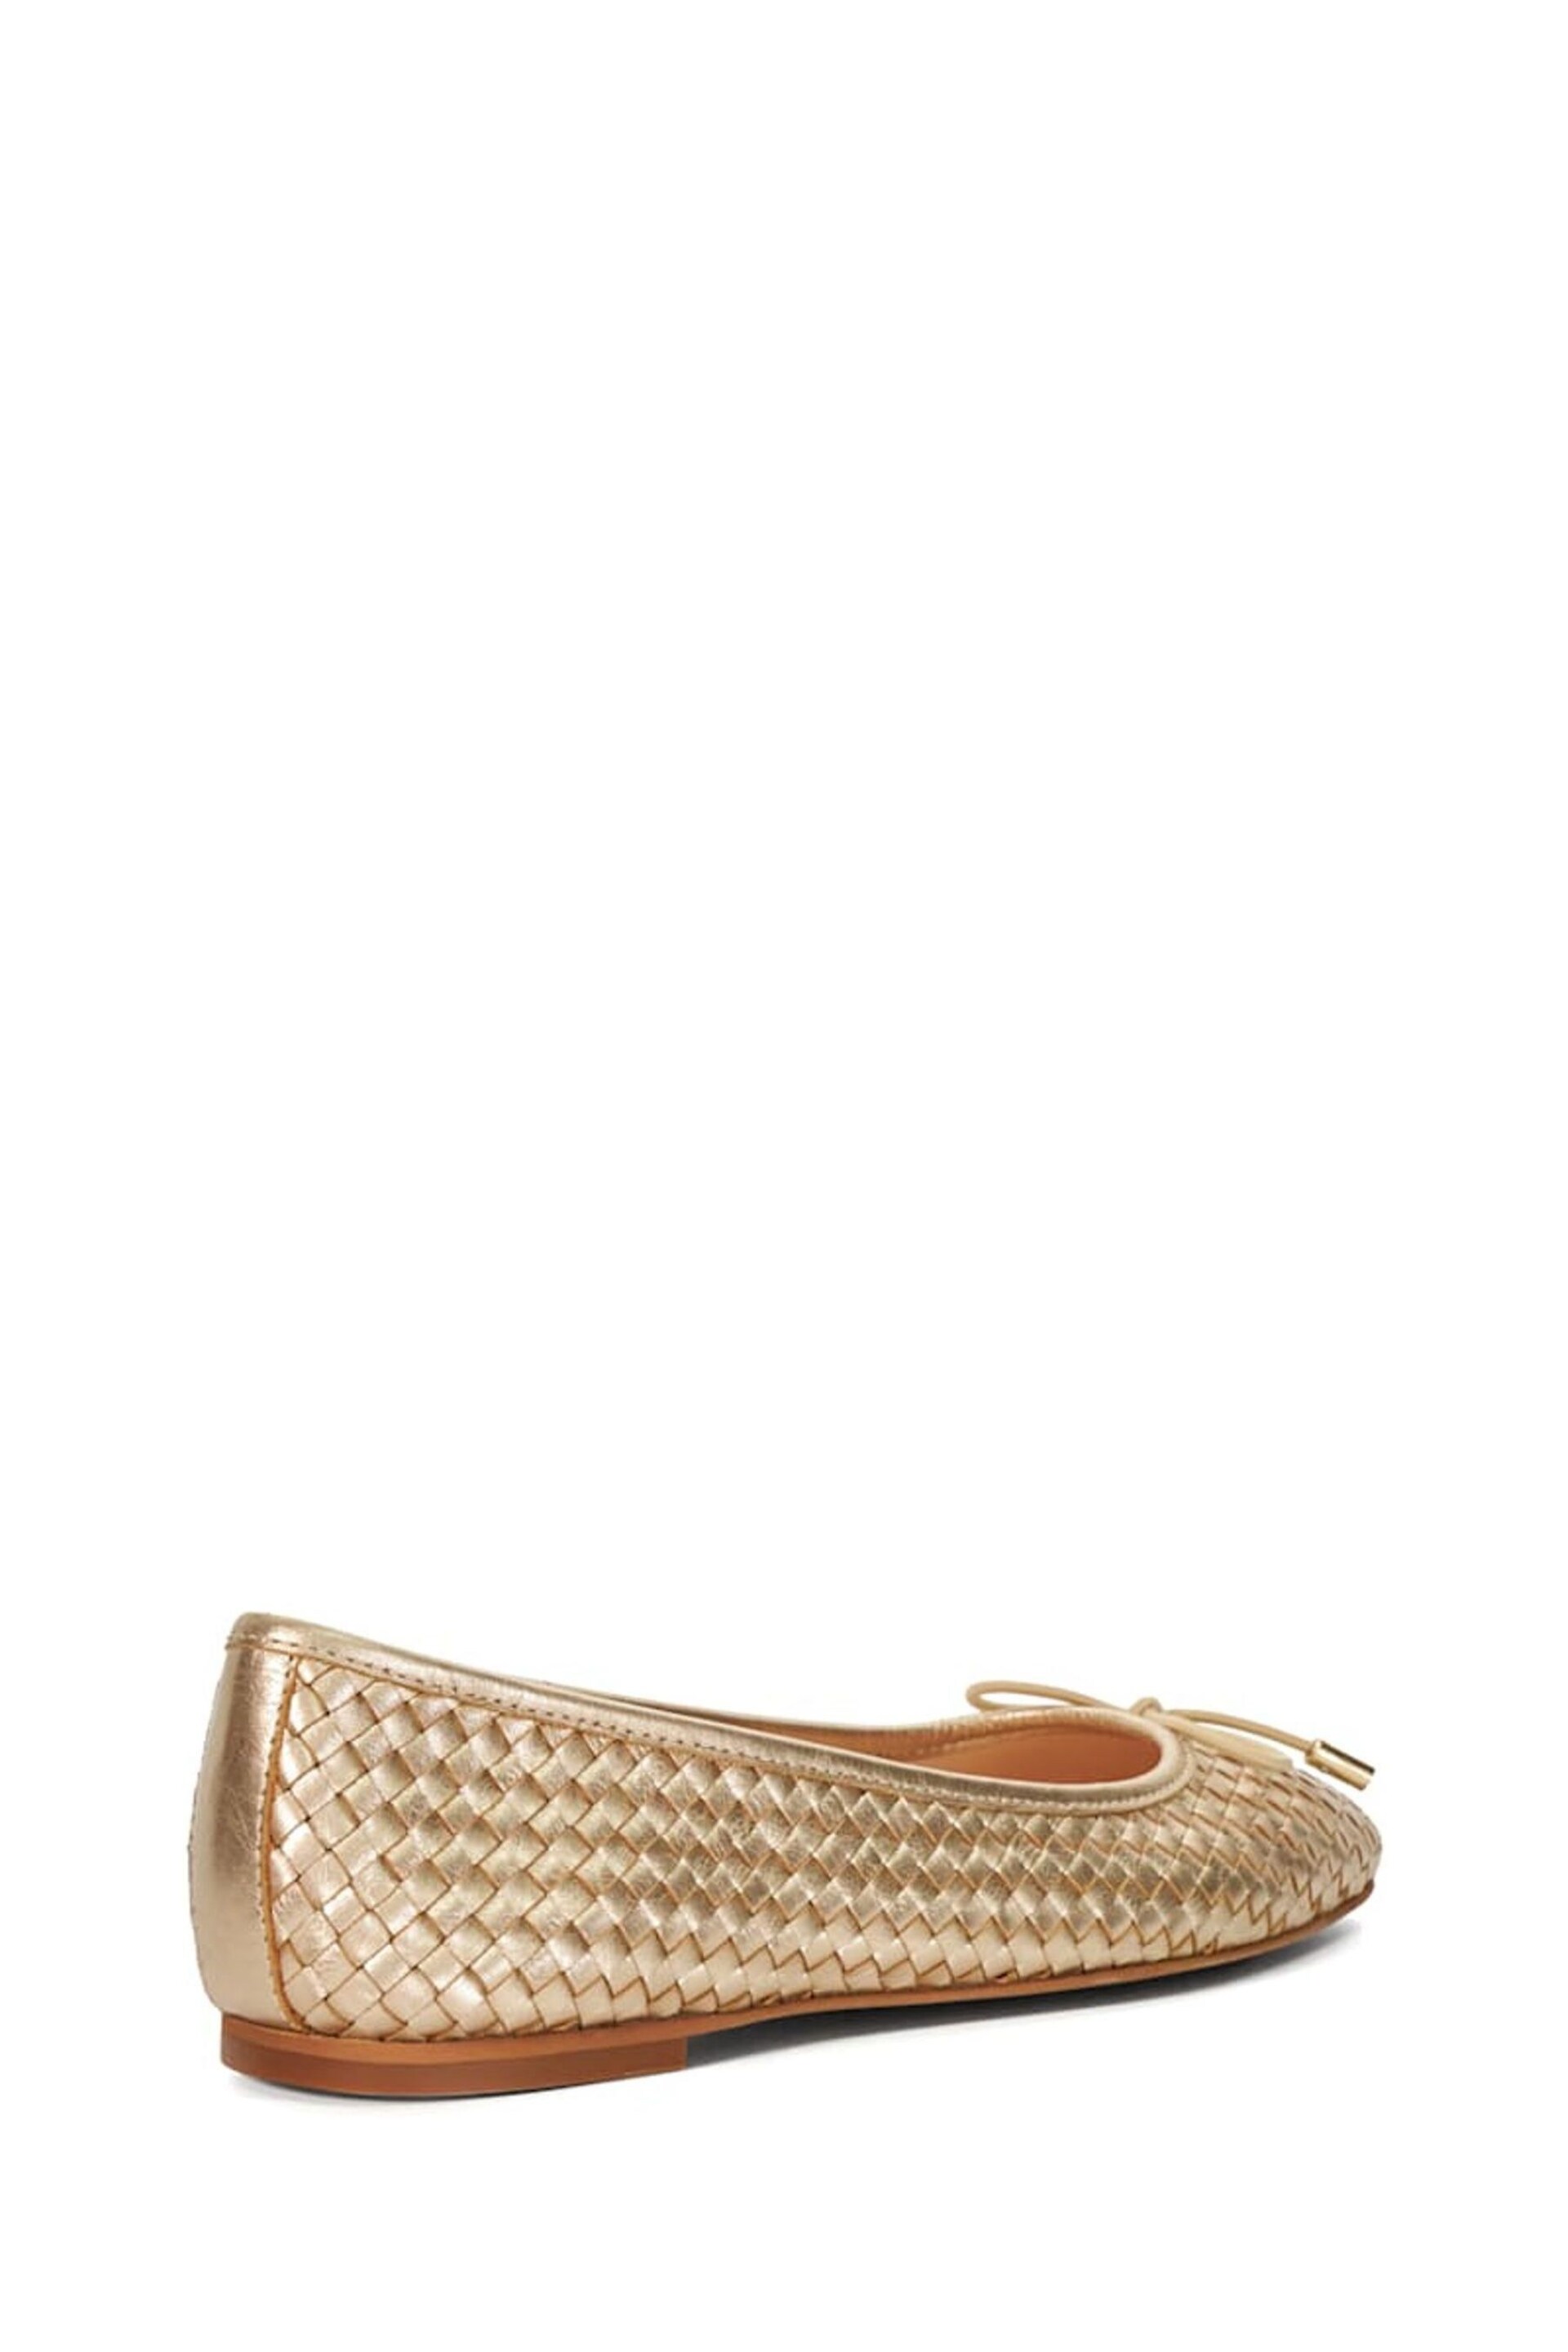 Dune London Gold Heights Flexible Sole Woven Ballerina Flat Shoes - Image 3 of 7